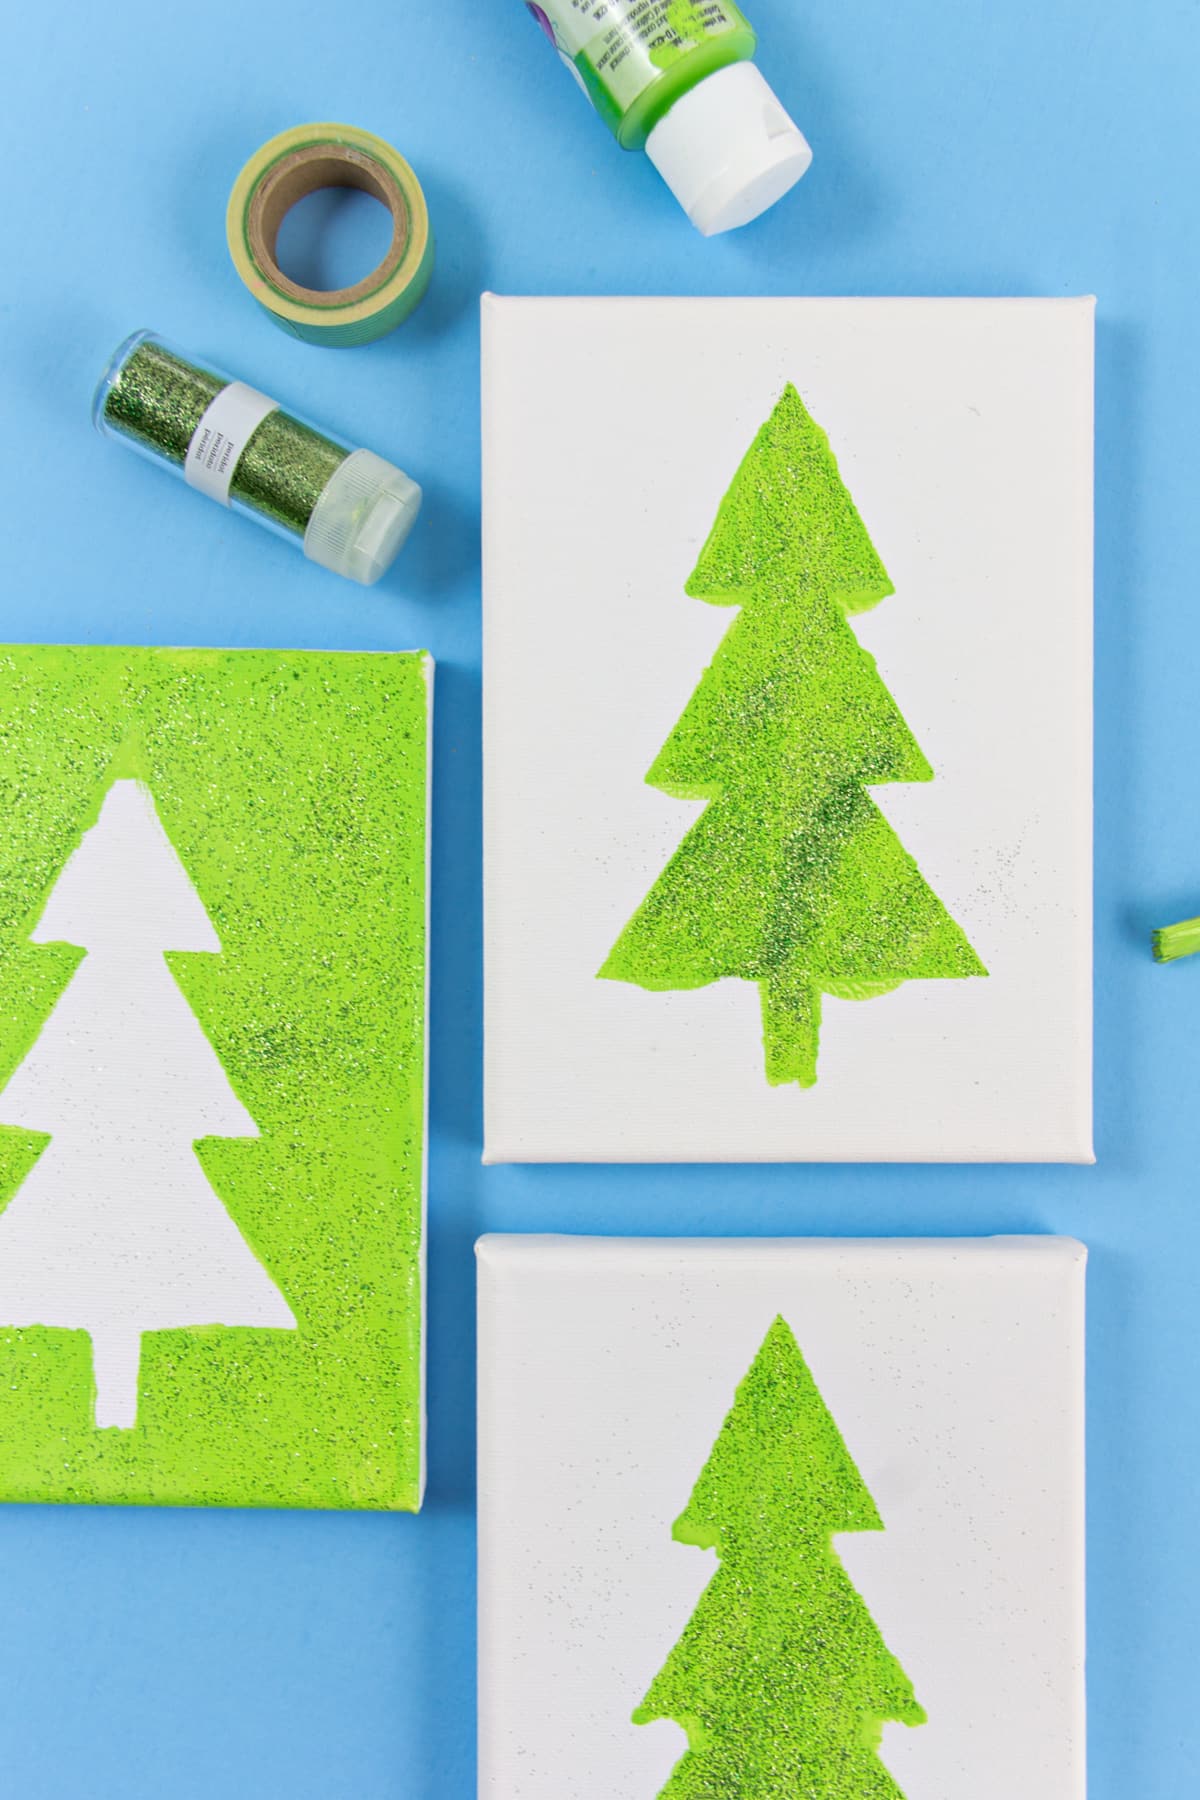 Christmas tree art on canvas for kids using stencils and tape